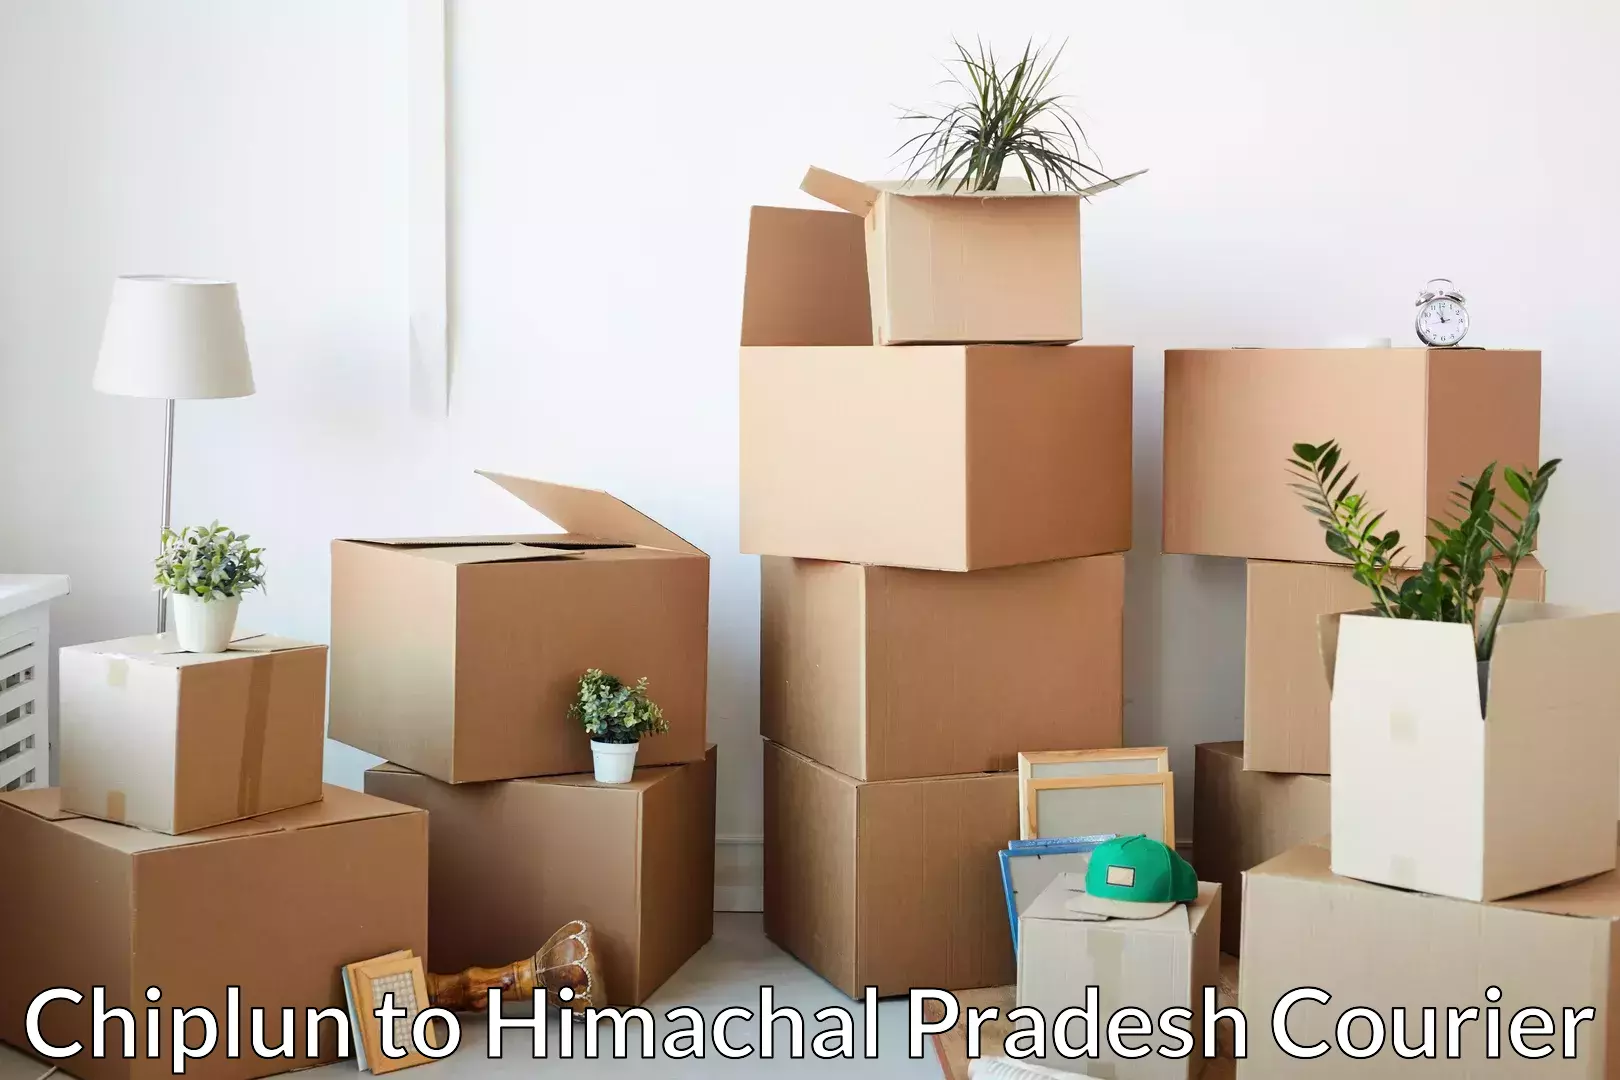 Home goods moving company Chiplun to Jukhala